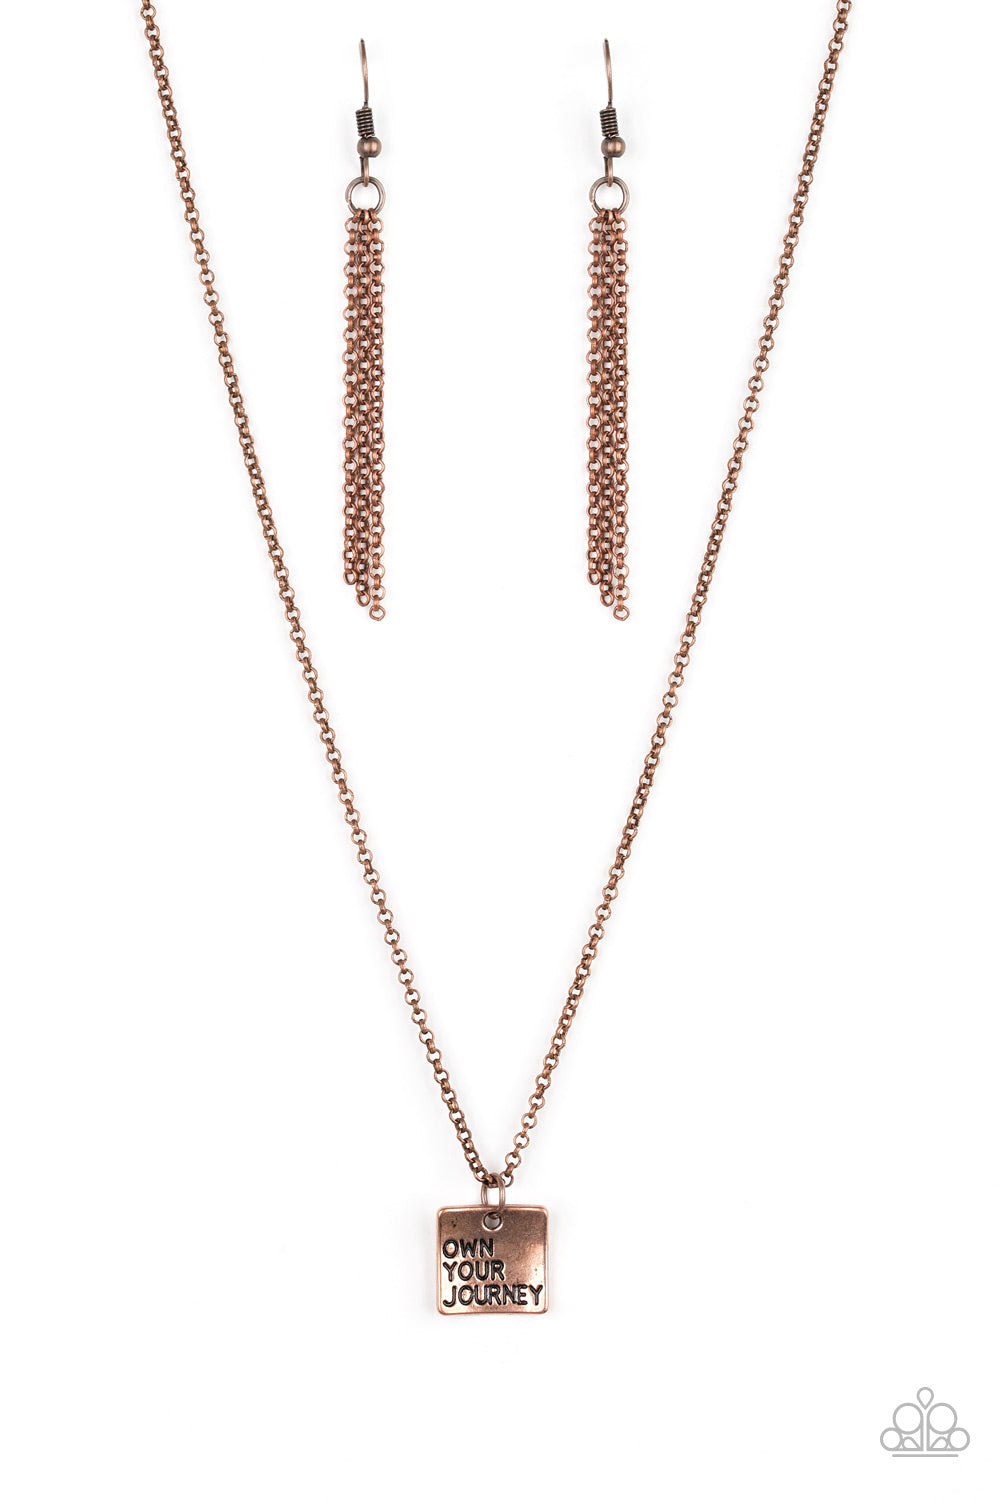 Own Your Journey - Copper - Necklace - Paparazzi Accessories